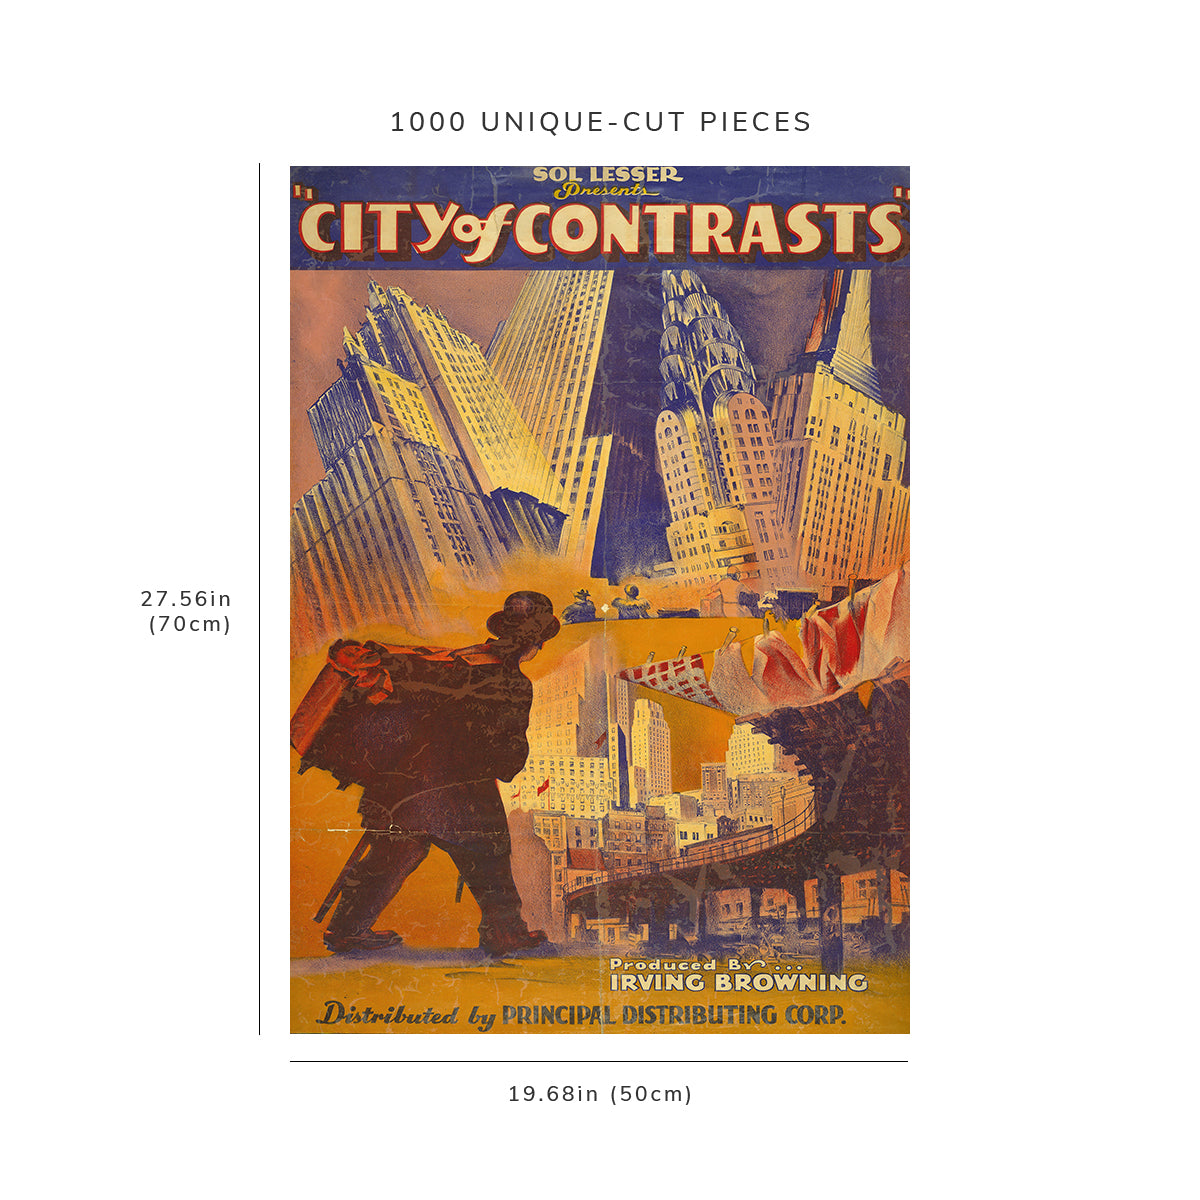 1000 piece puzzle: 1931 | Sol Lesser presents City of contrasts | Plampin Litho Inc.